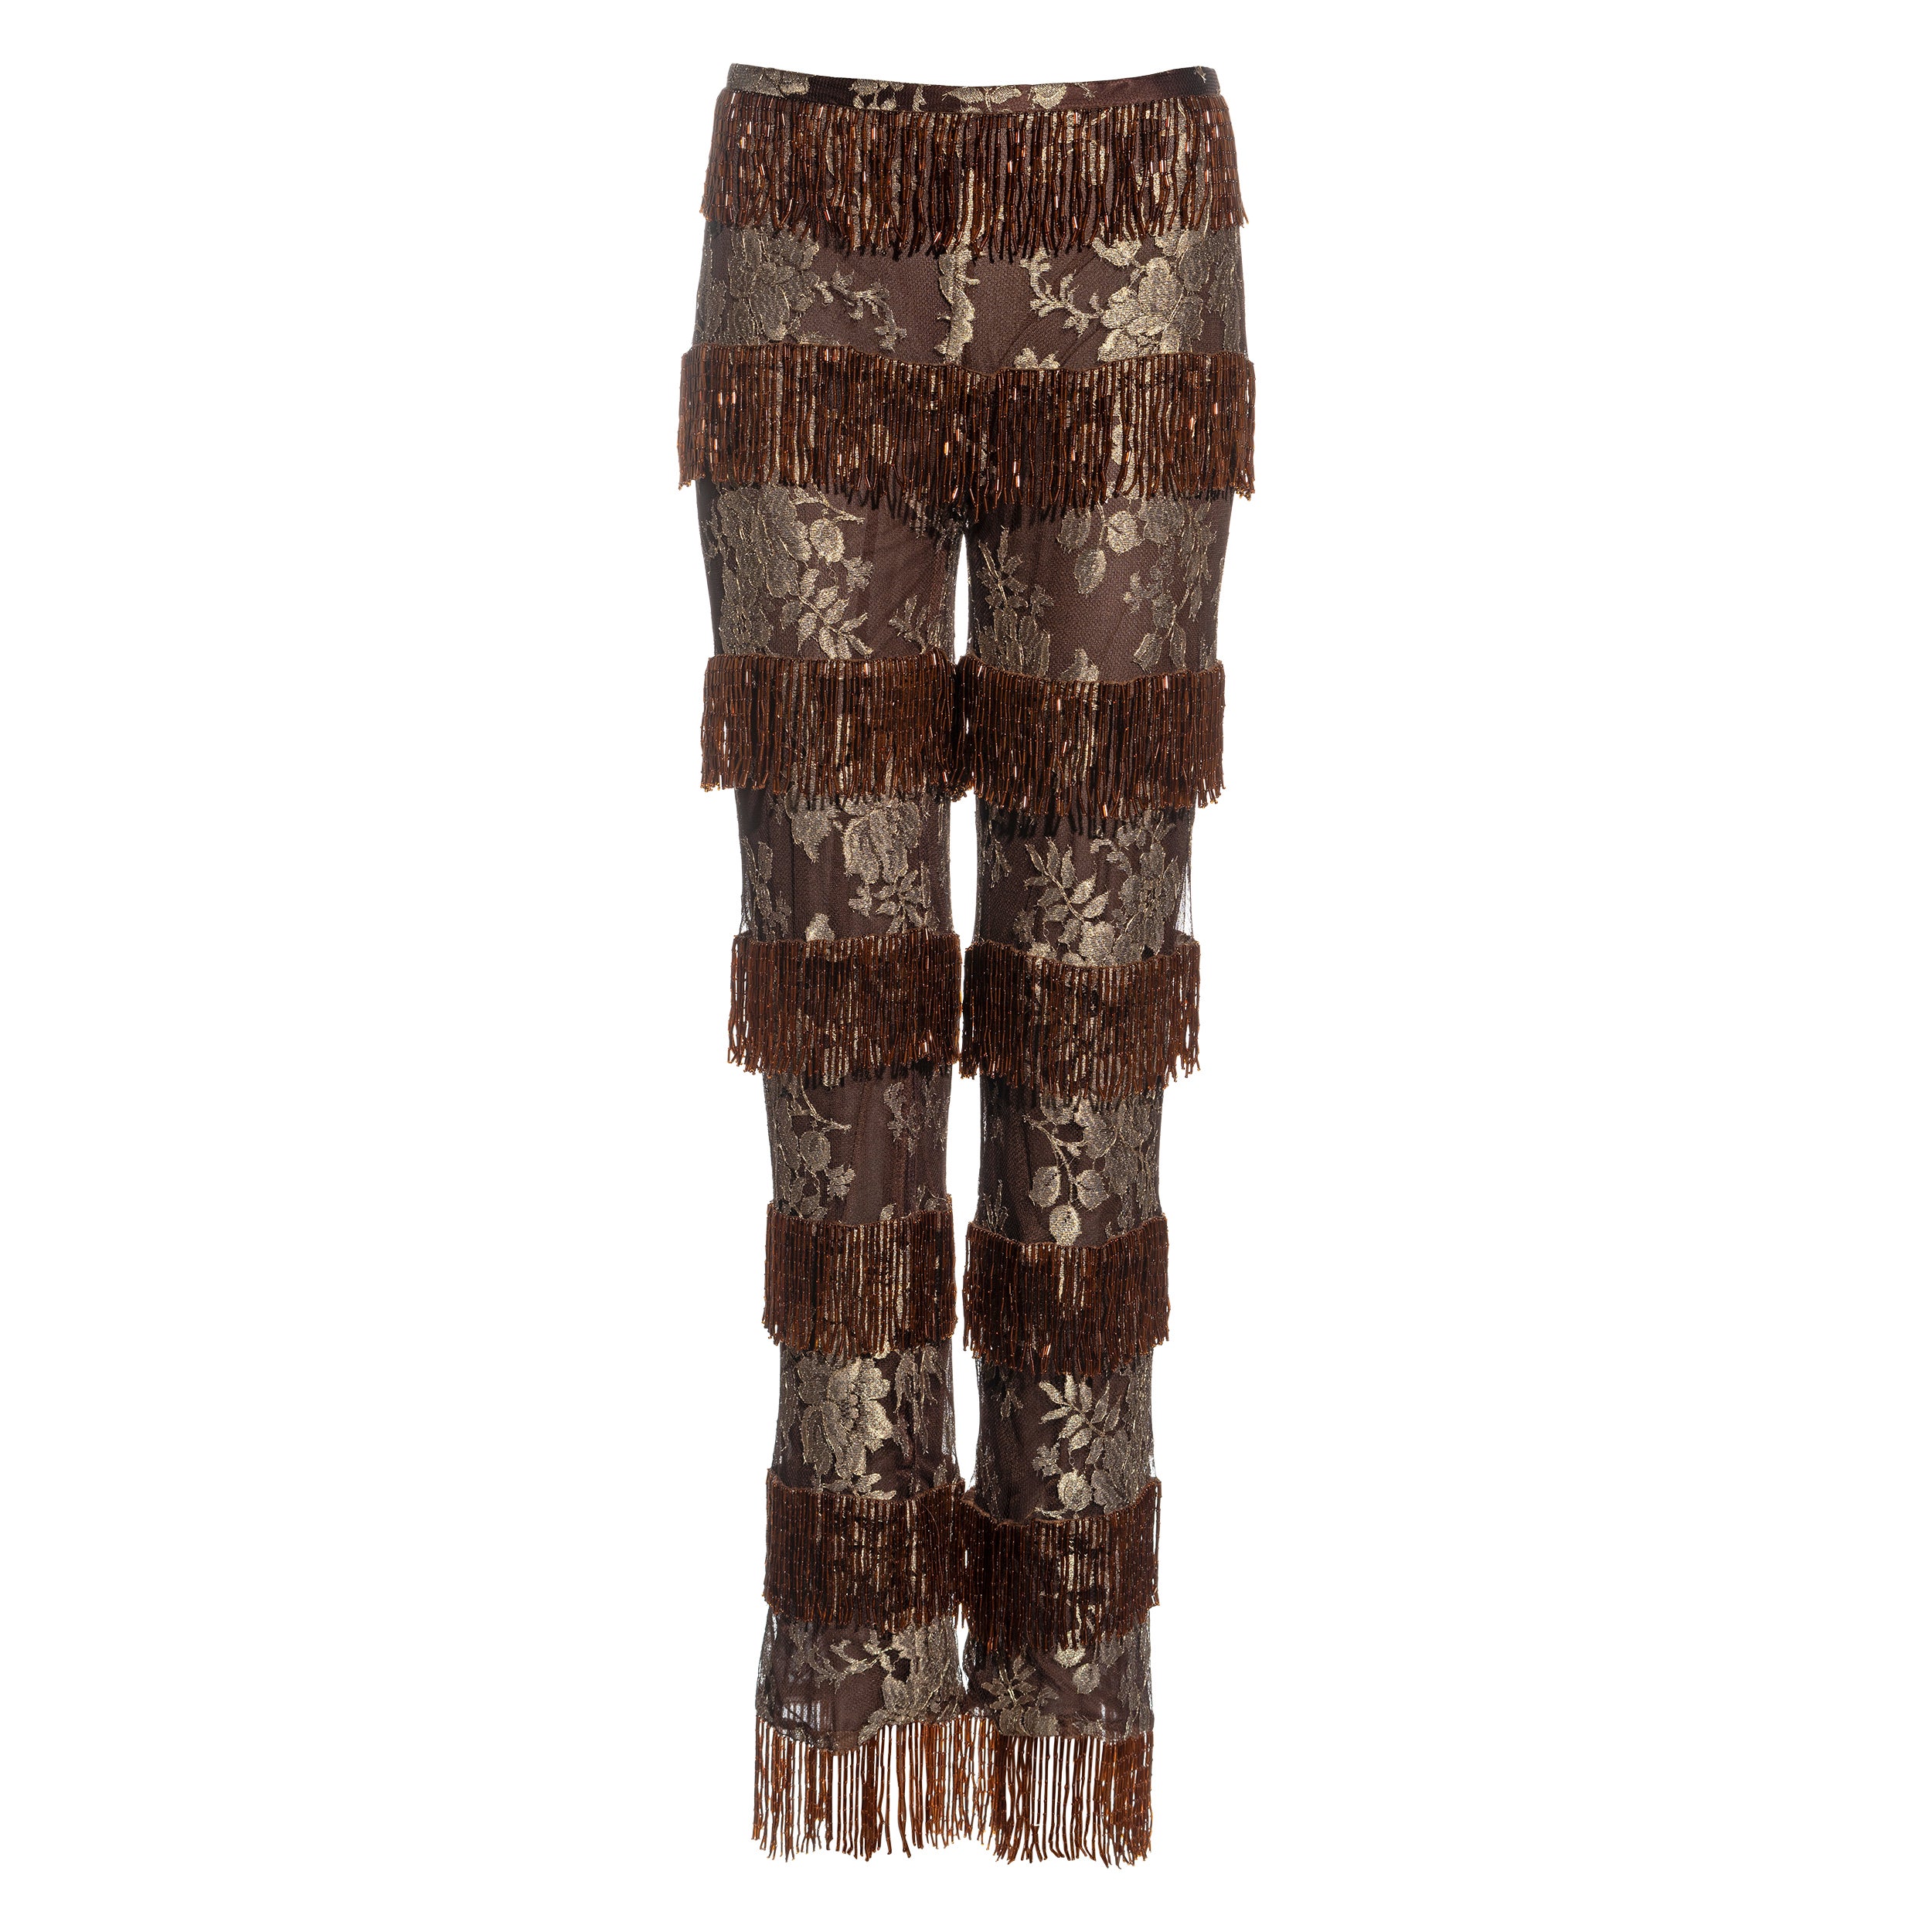 Dolce & Gabbana metallic gold and copper lace beaded fringe pants, ss 2000 For Sale